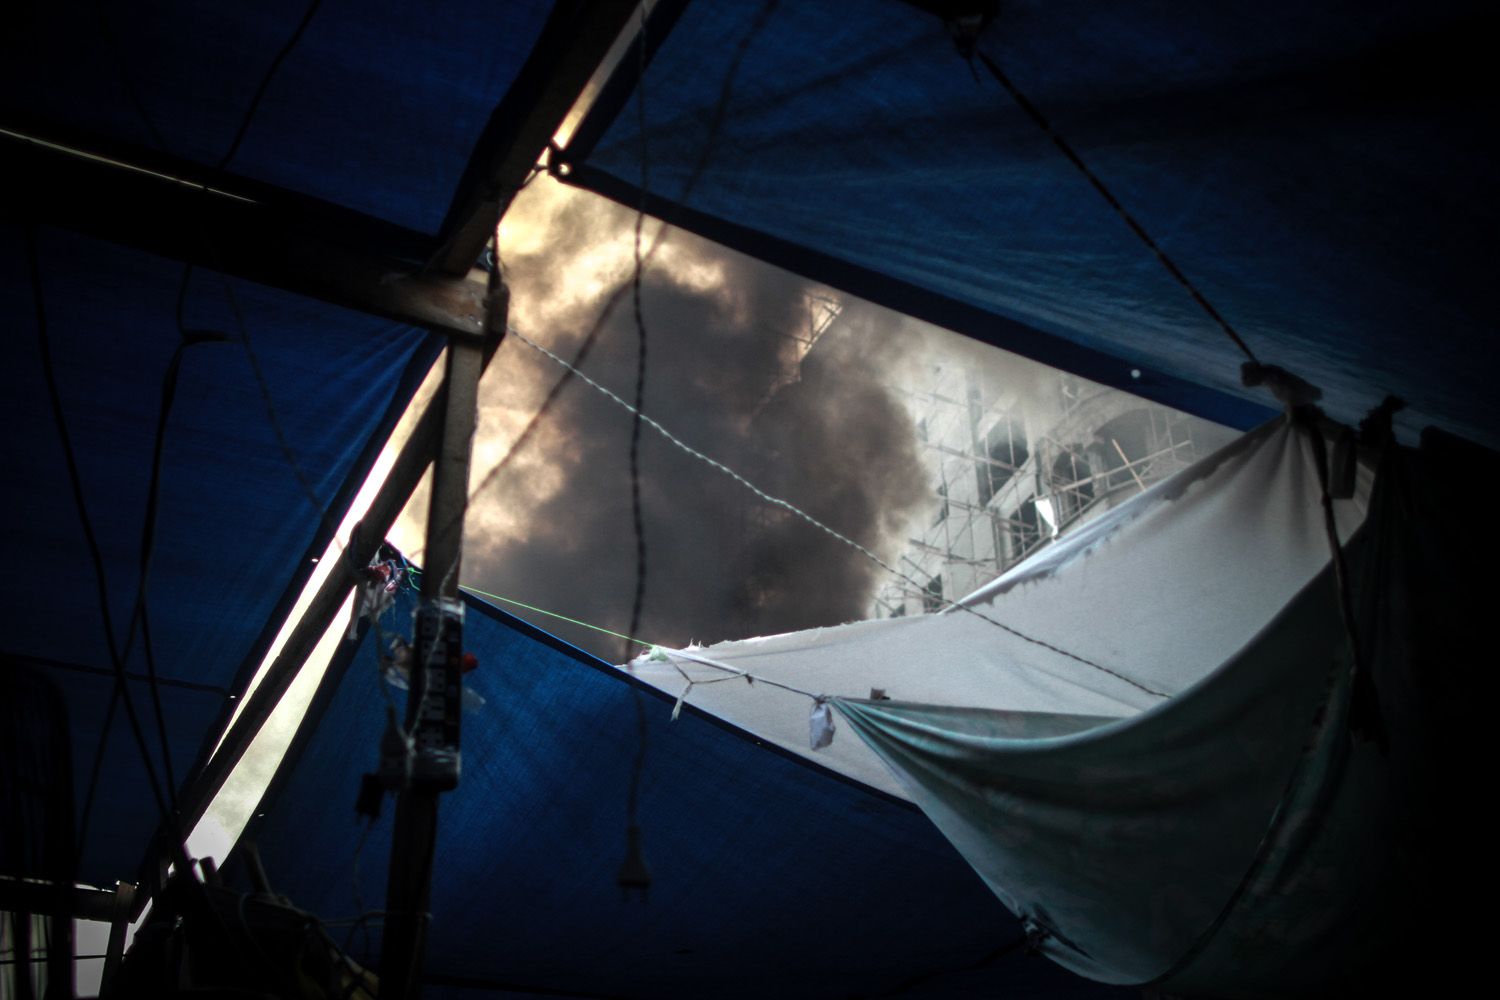 Smoke is seen from a tent in Rabaa Adaweya square during the violent dispersal of the camp, where Morsi supporters had camped for 40 days. August 14, 2013.